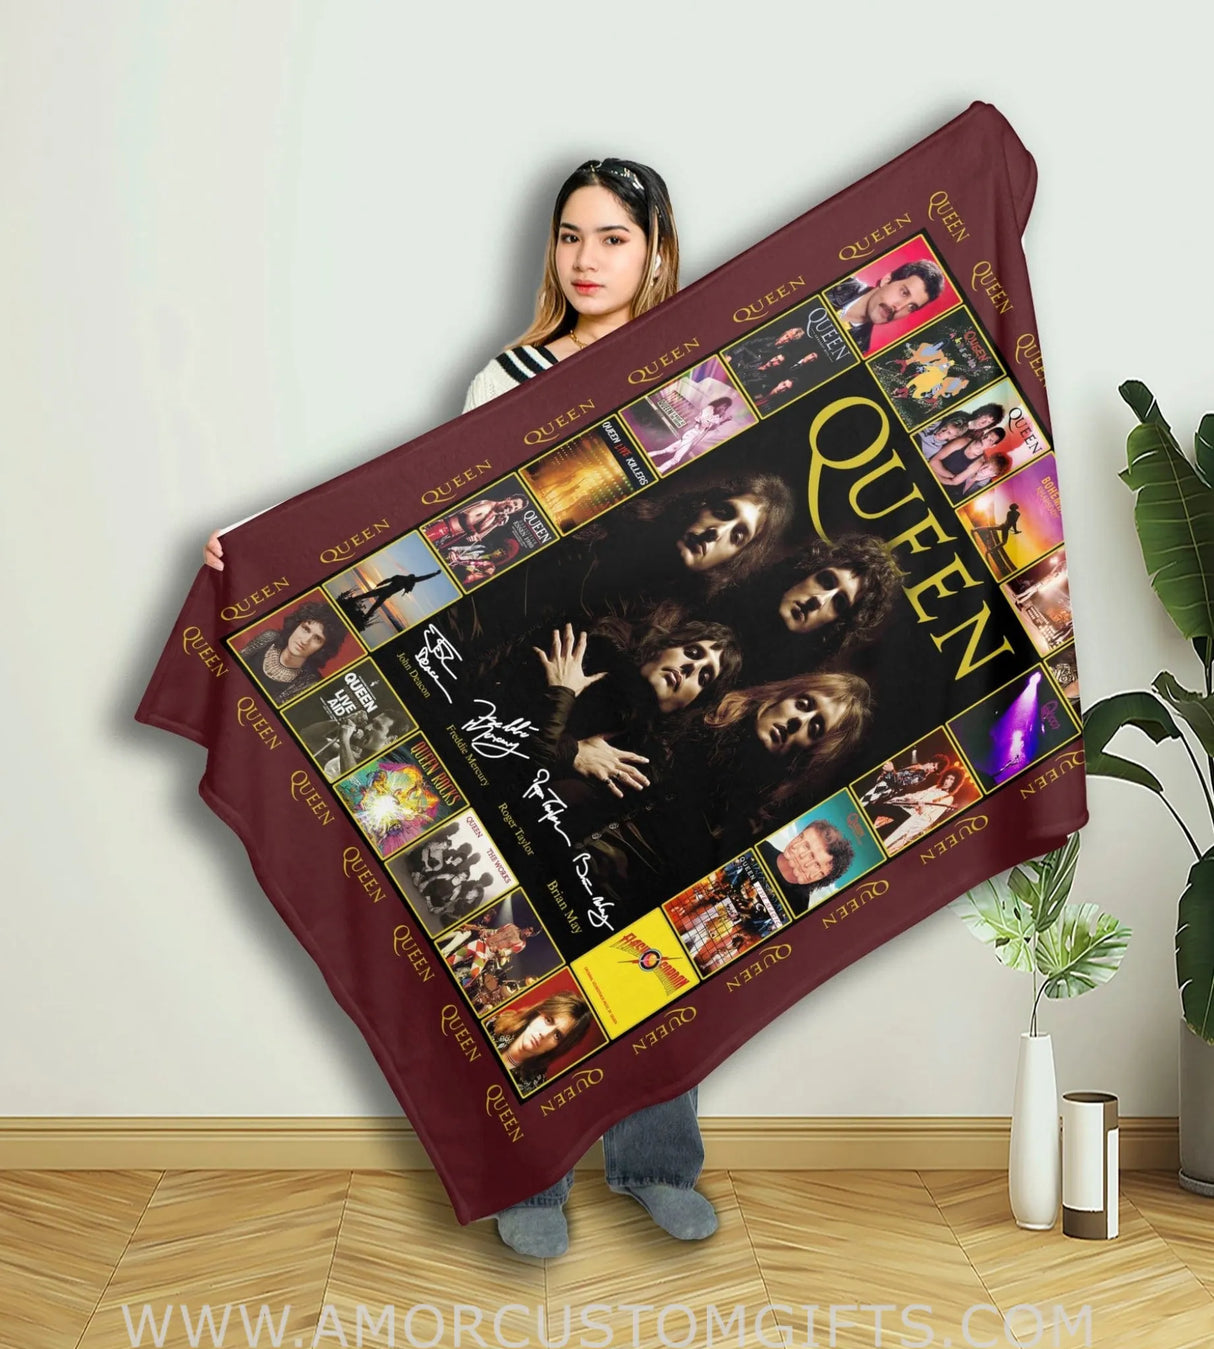 Blankets Personalized Name Queen Poster Boy Girl Blanket